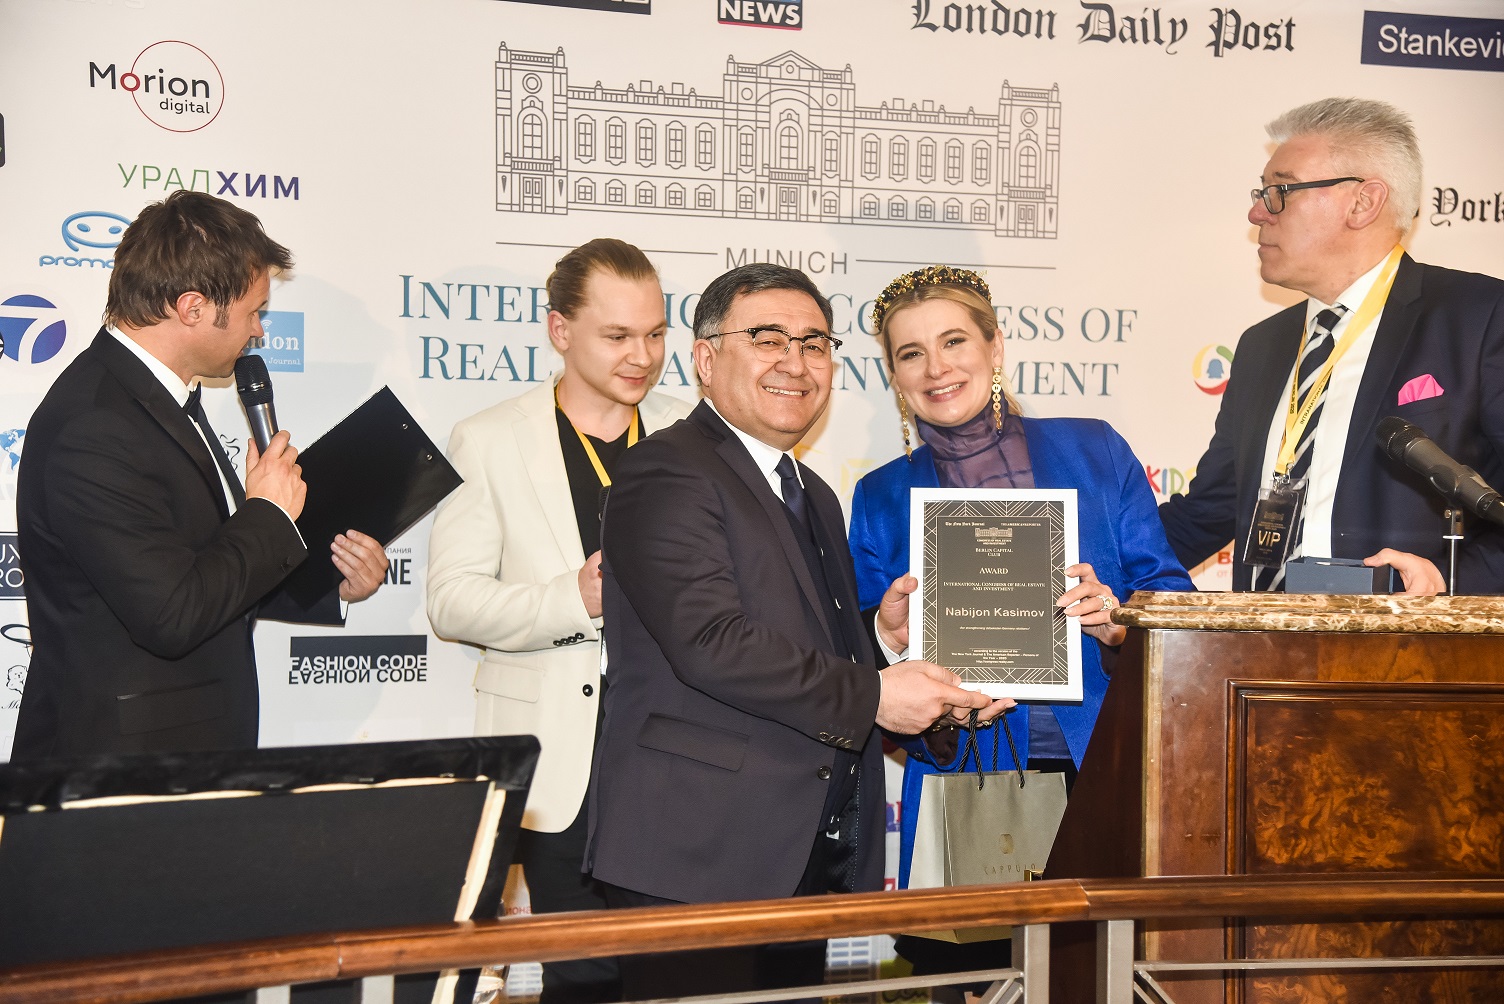 The VI International Congress of Real Estate and Investment 2020 ended in Berlin